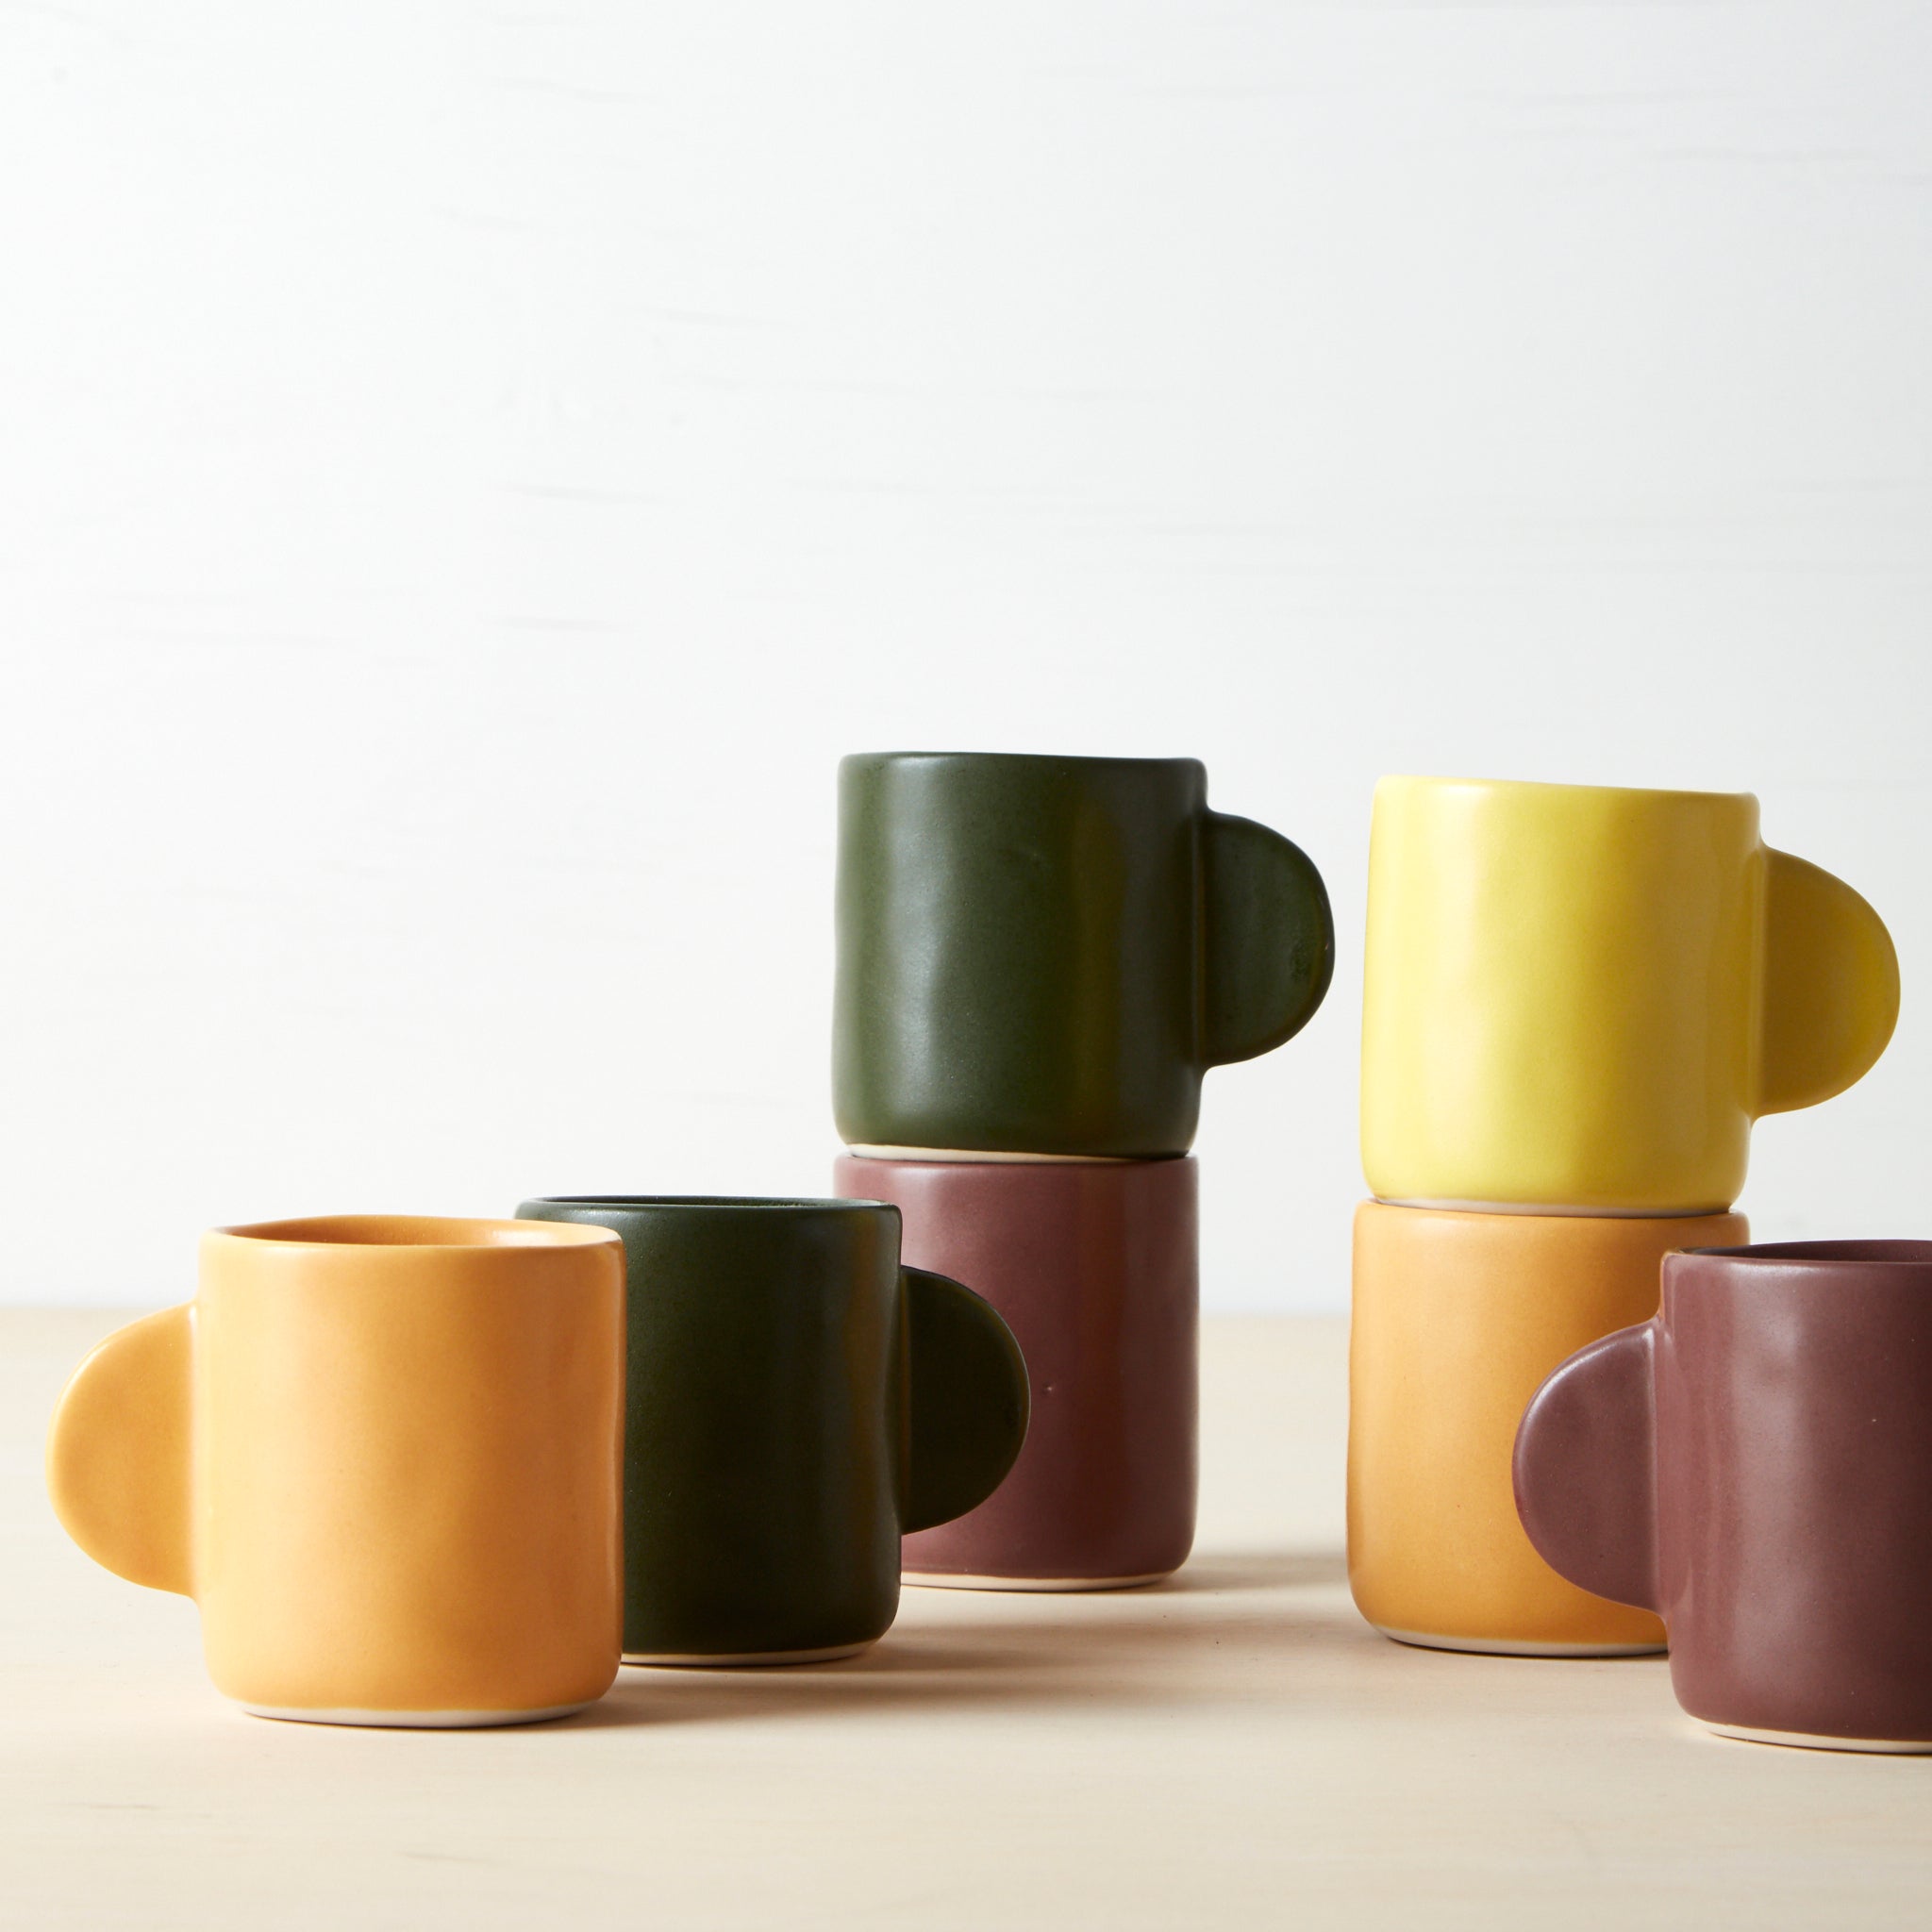 sunnys pop glazed espresso cup variety colors by felt+hat.20194443